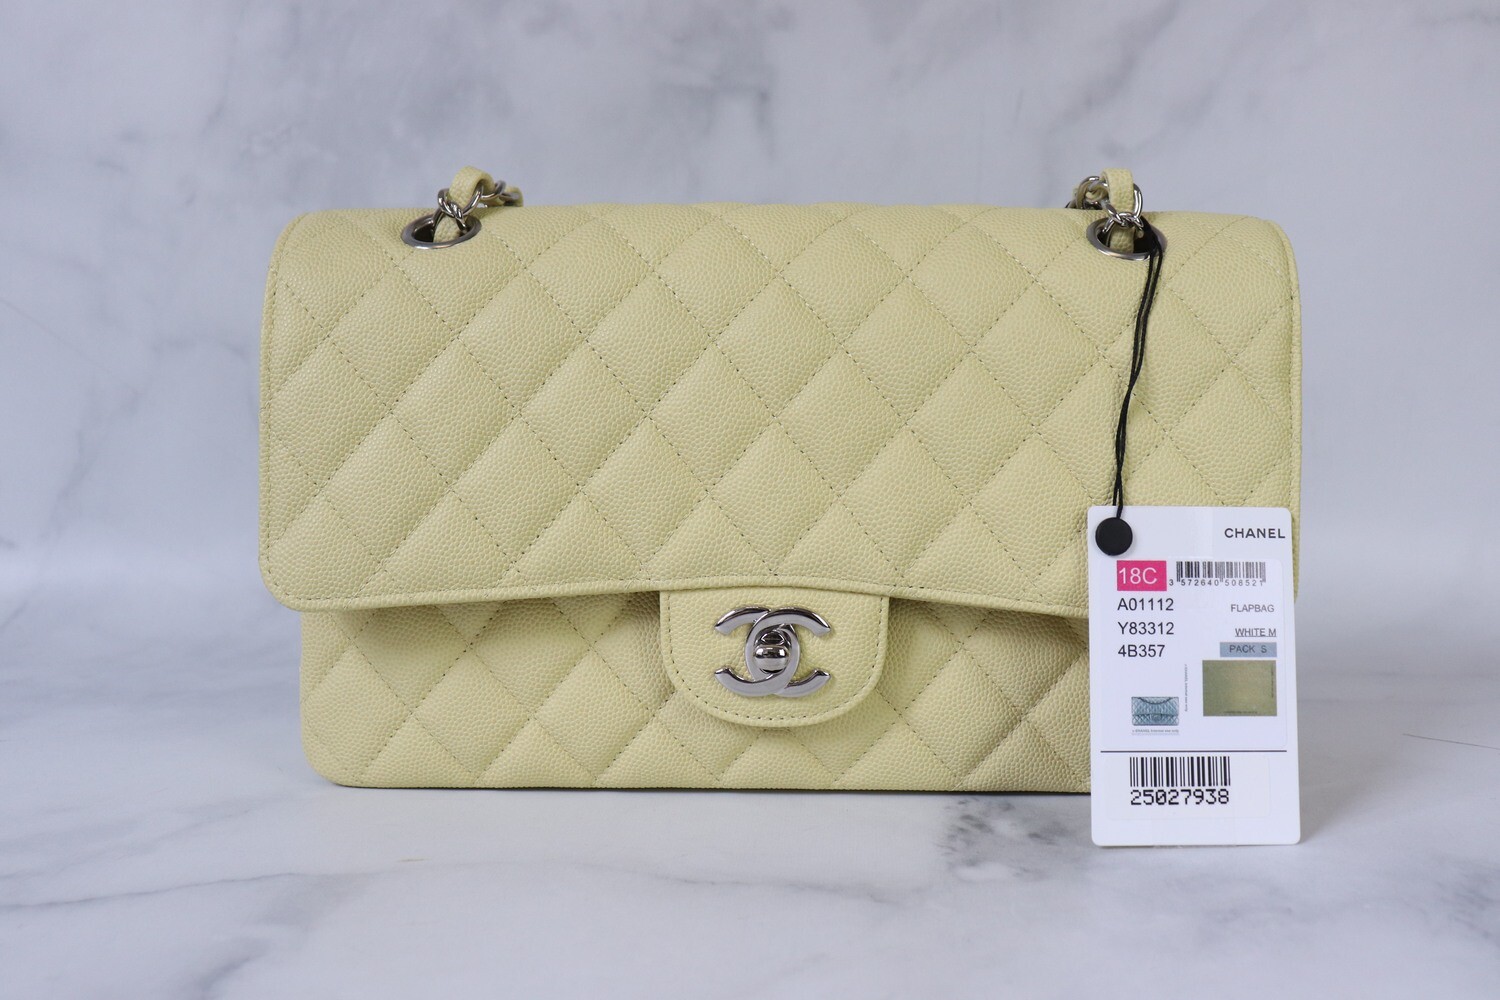 Chanel Classic Double Flap, 18C Yellow Caviar Leather, As New In Box